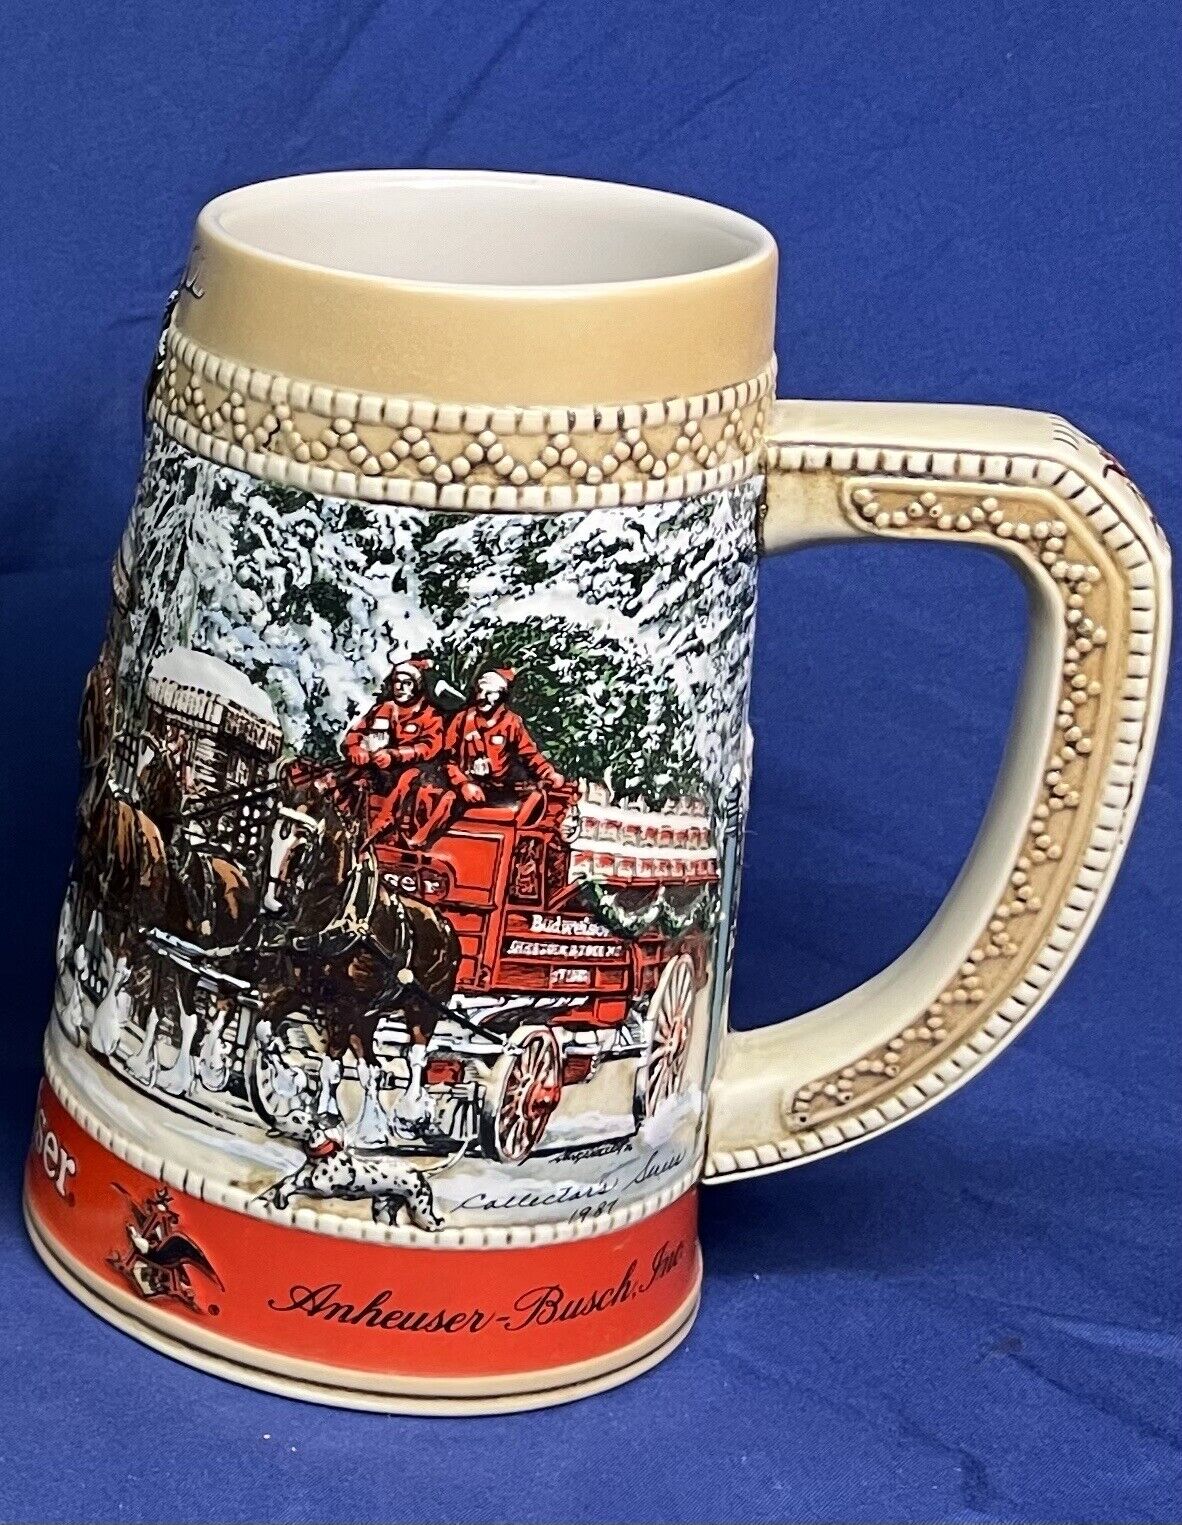 One 1987 Budweiser Clydesdale Collector Beer Stein “C\